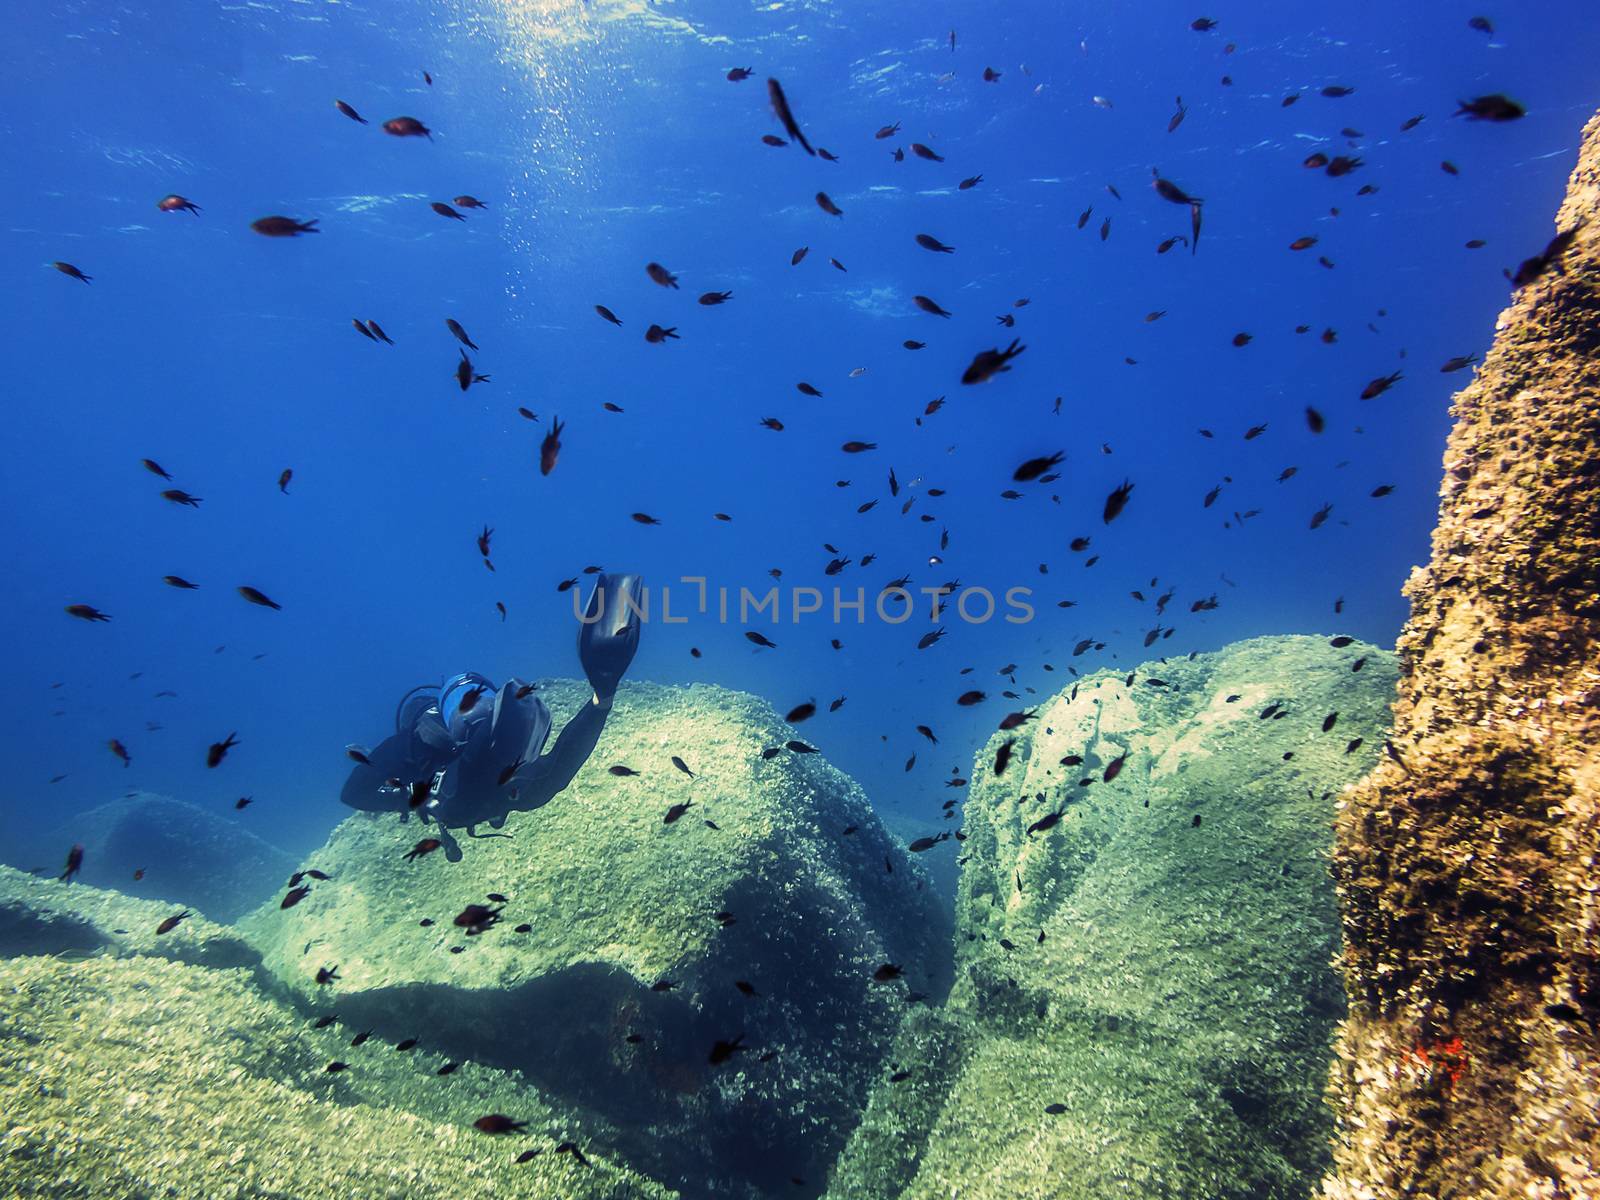 person diving in the blue sea surrounded by fishes by raulmelldo